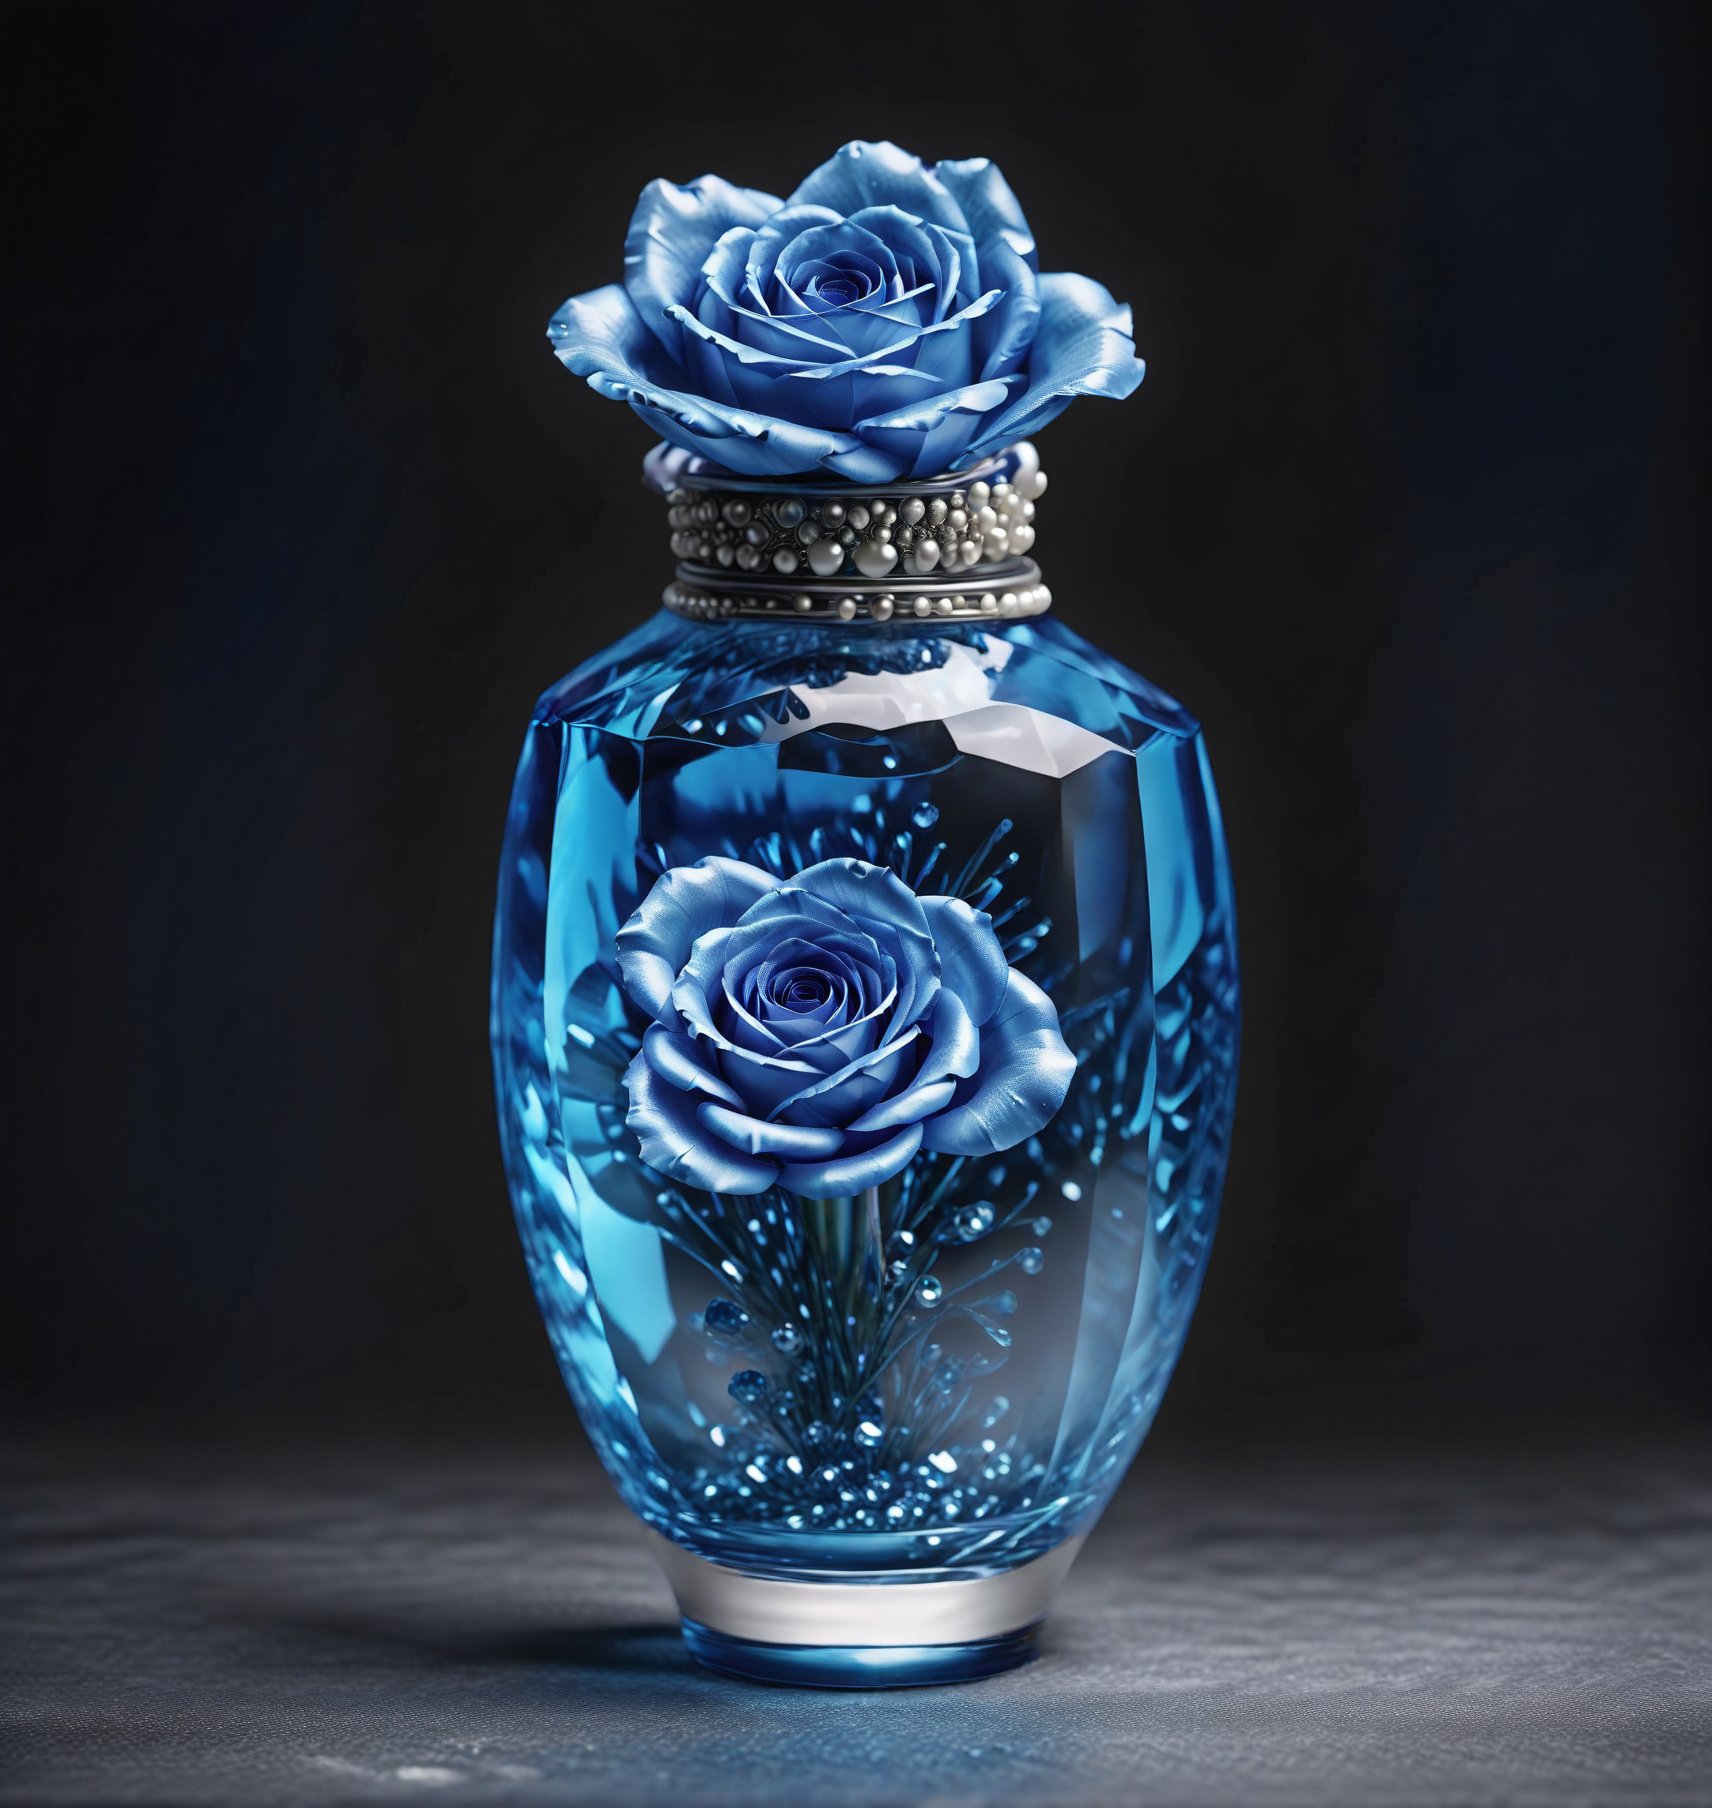 A single-stem crystal vase holds a bright blue rose. On the table at the base of the vase, there are pearls of various colors,DonM1r0nF1l1ng5XL,APEX colourful 